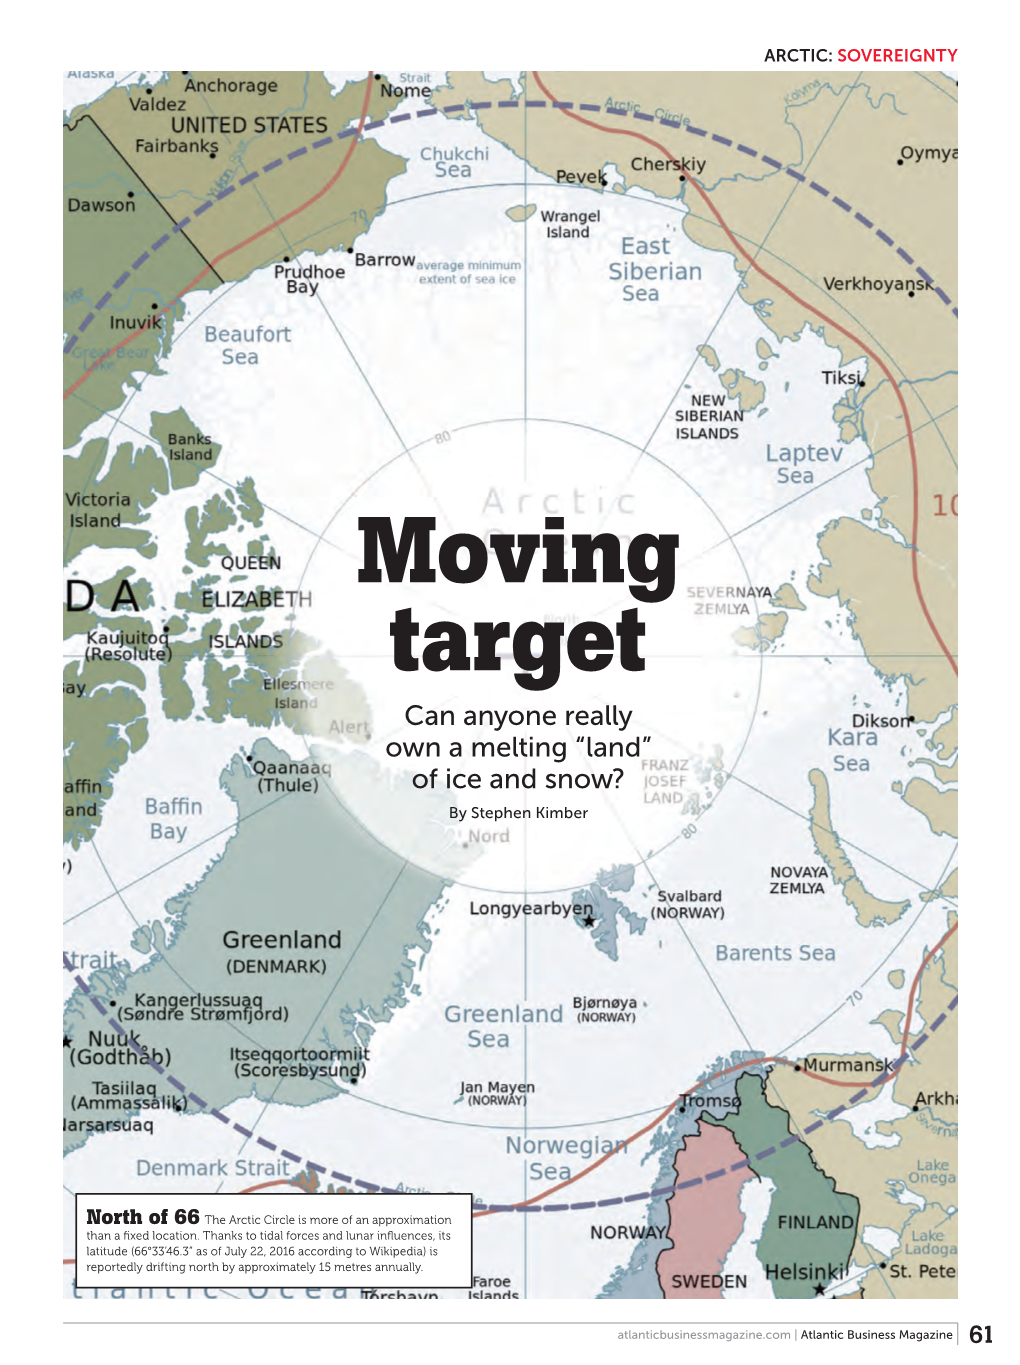 Moving Target Can Anyone Really Own a Melting “Land” of Ice and Snow? by Stephen Kimber